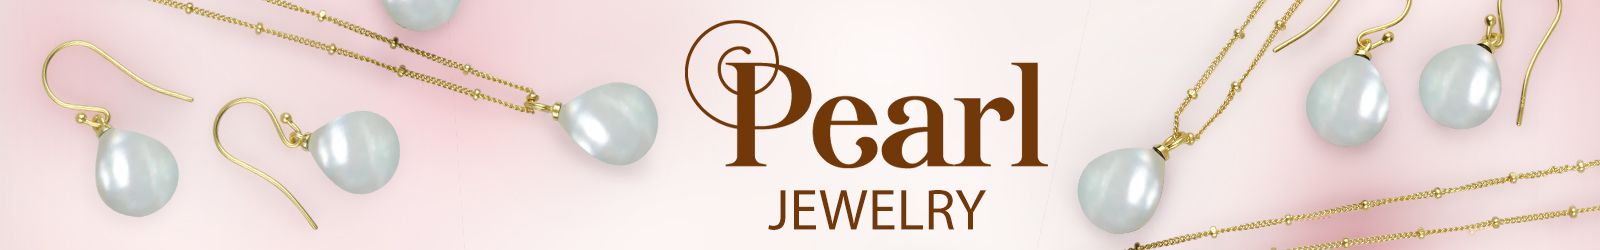 Silver Pearl Jewelry Wholesale Supplier